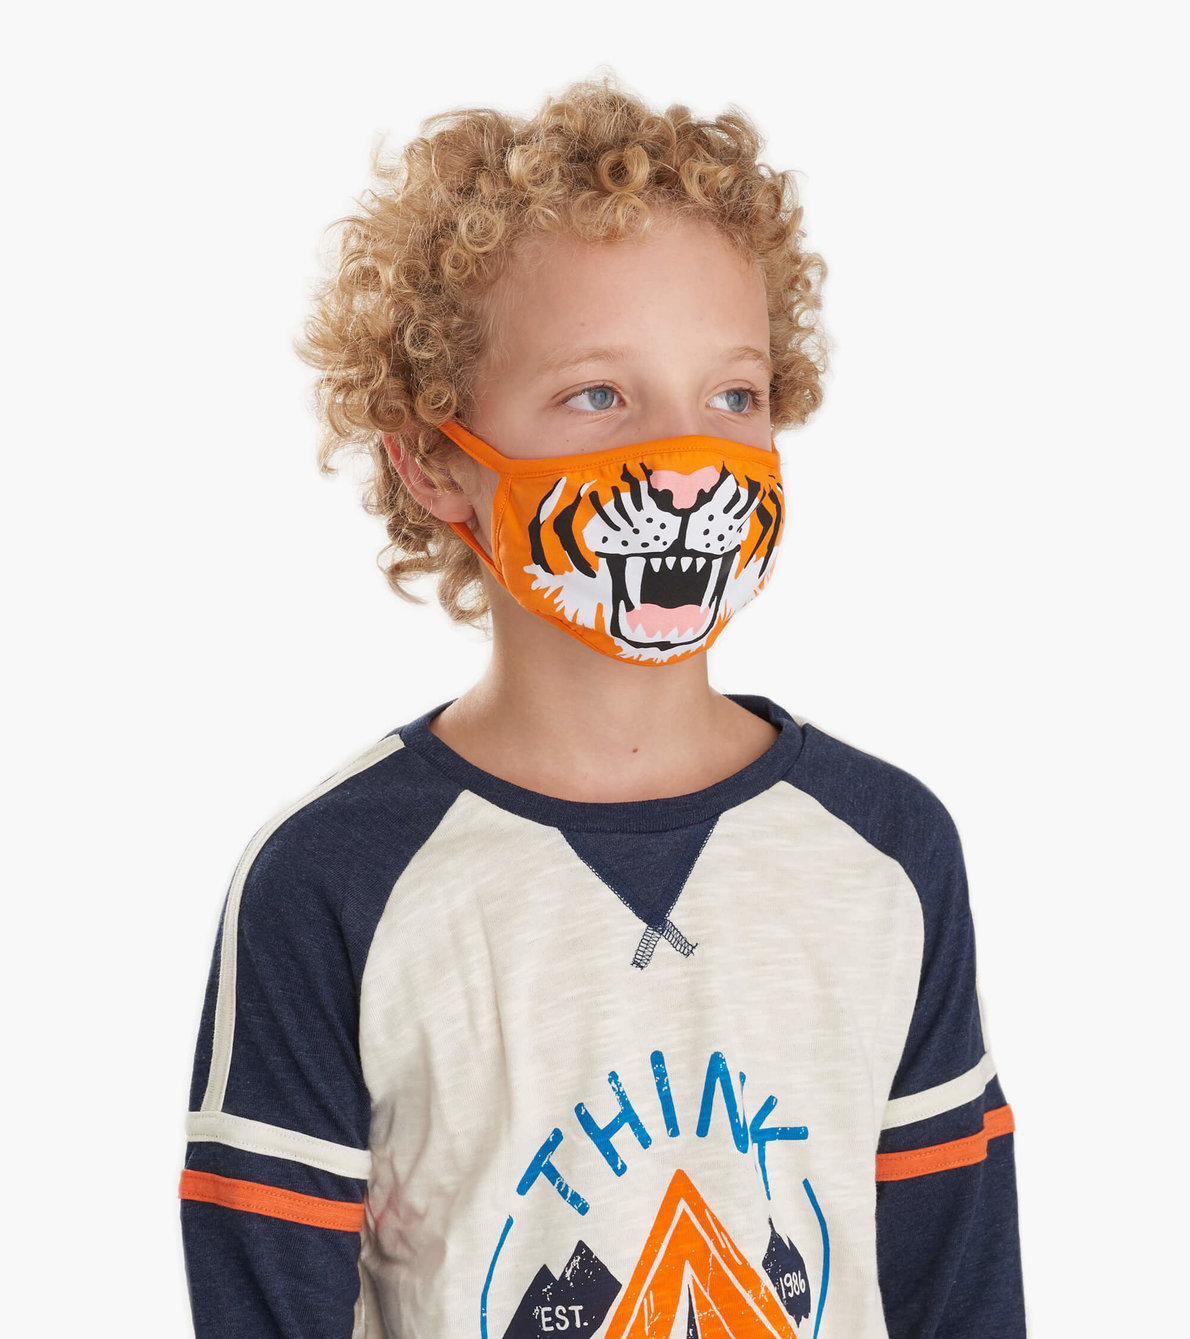 View larger image of Non-Medical Reusable Youth Face Mask (ages 6-10) - Tiger